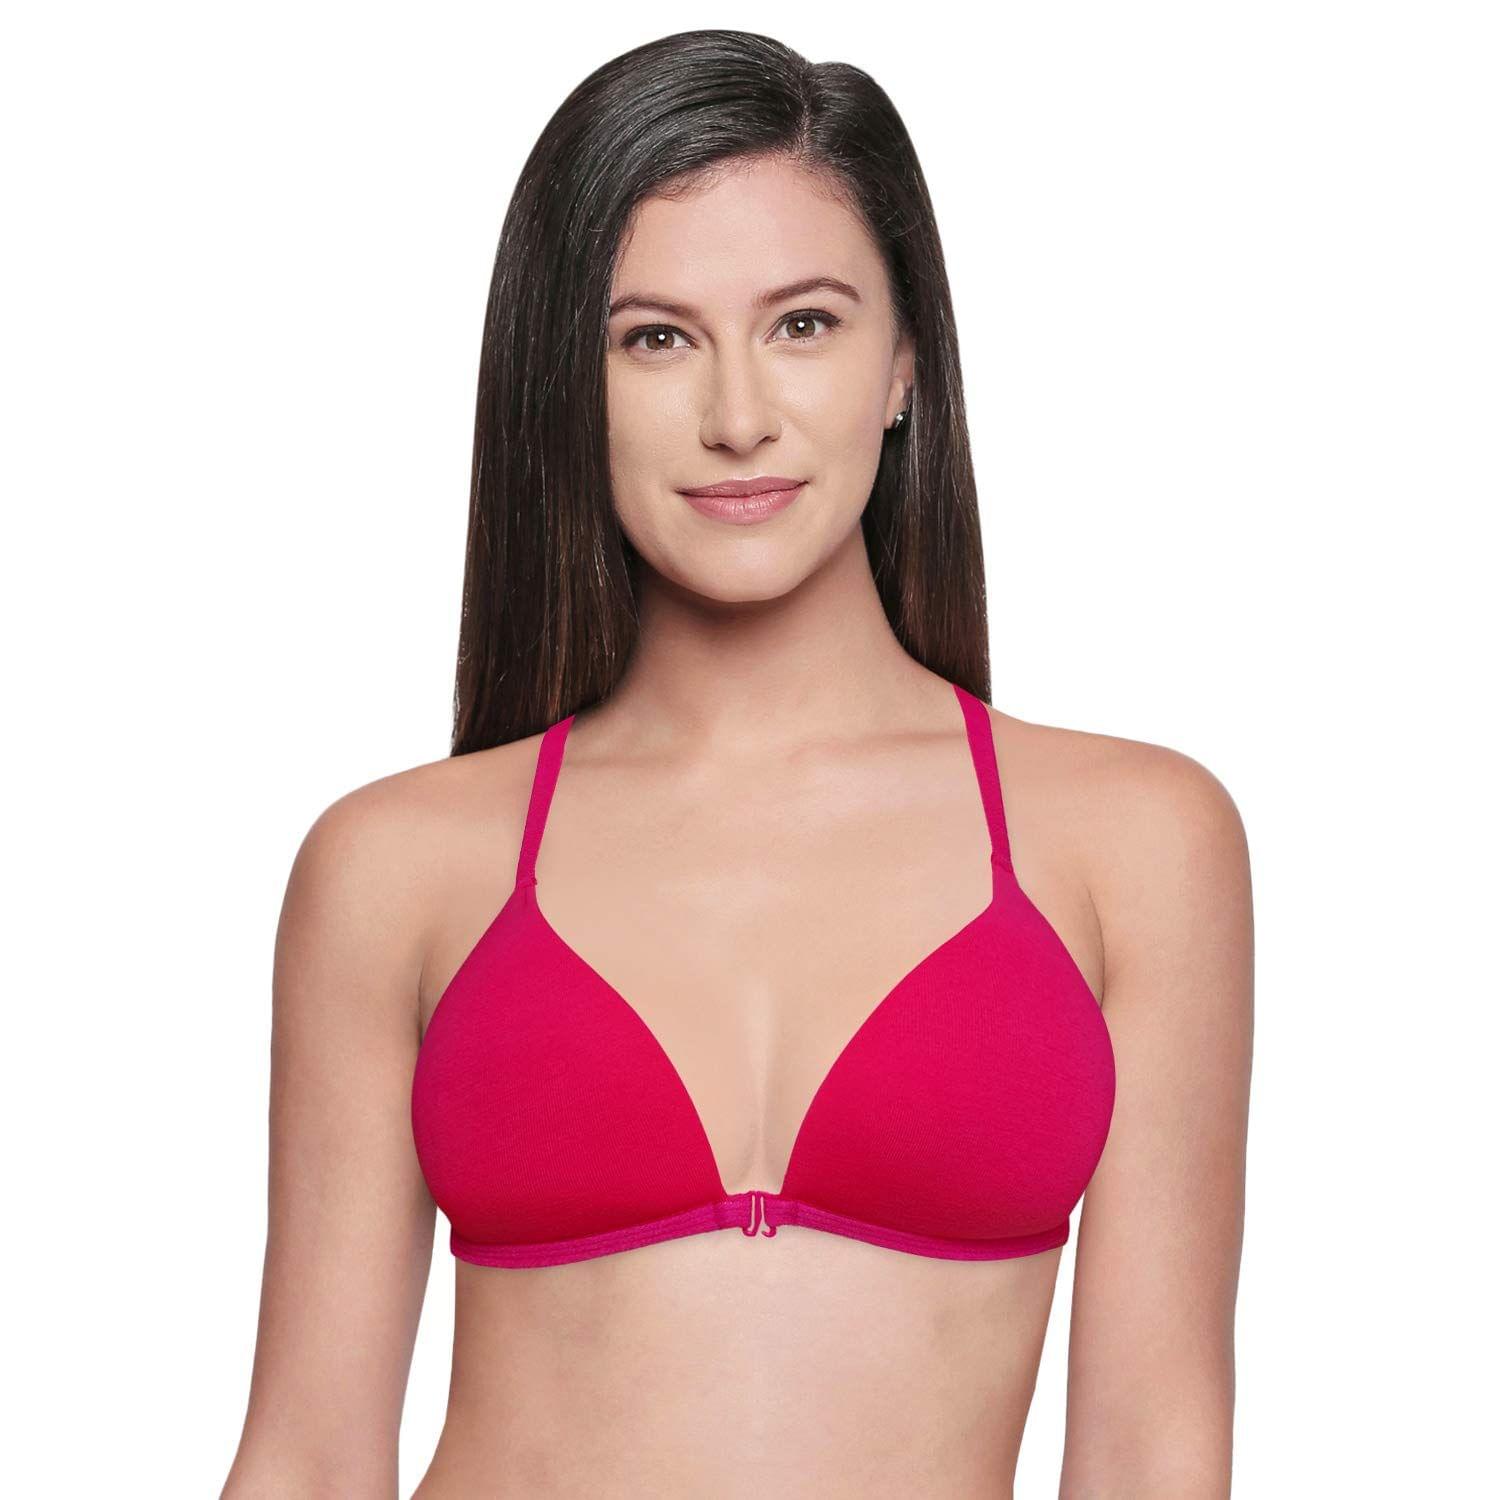 BODYCARE Low Coverage, Front Open, Seamless Padded Solid Color Bra in Pack  of 1-6571